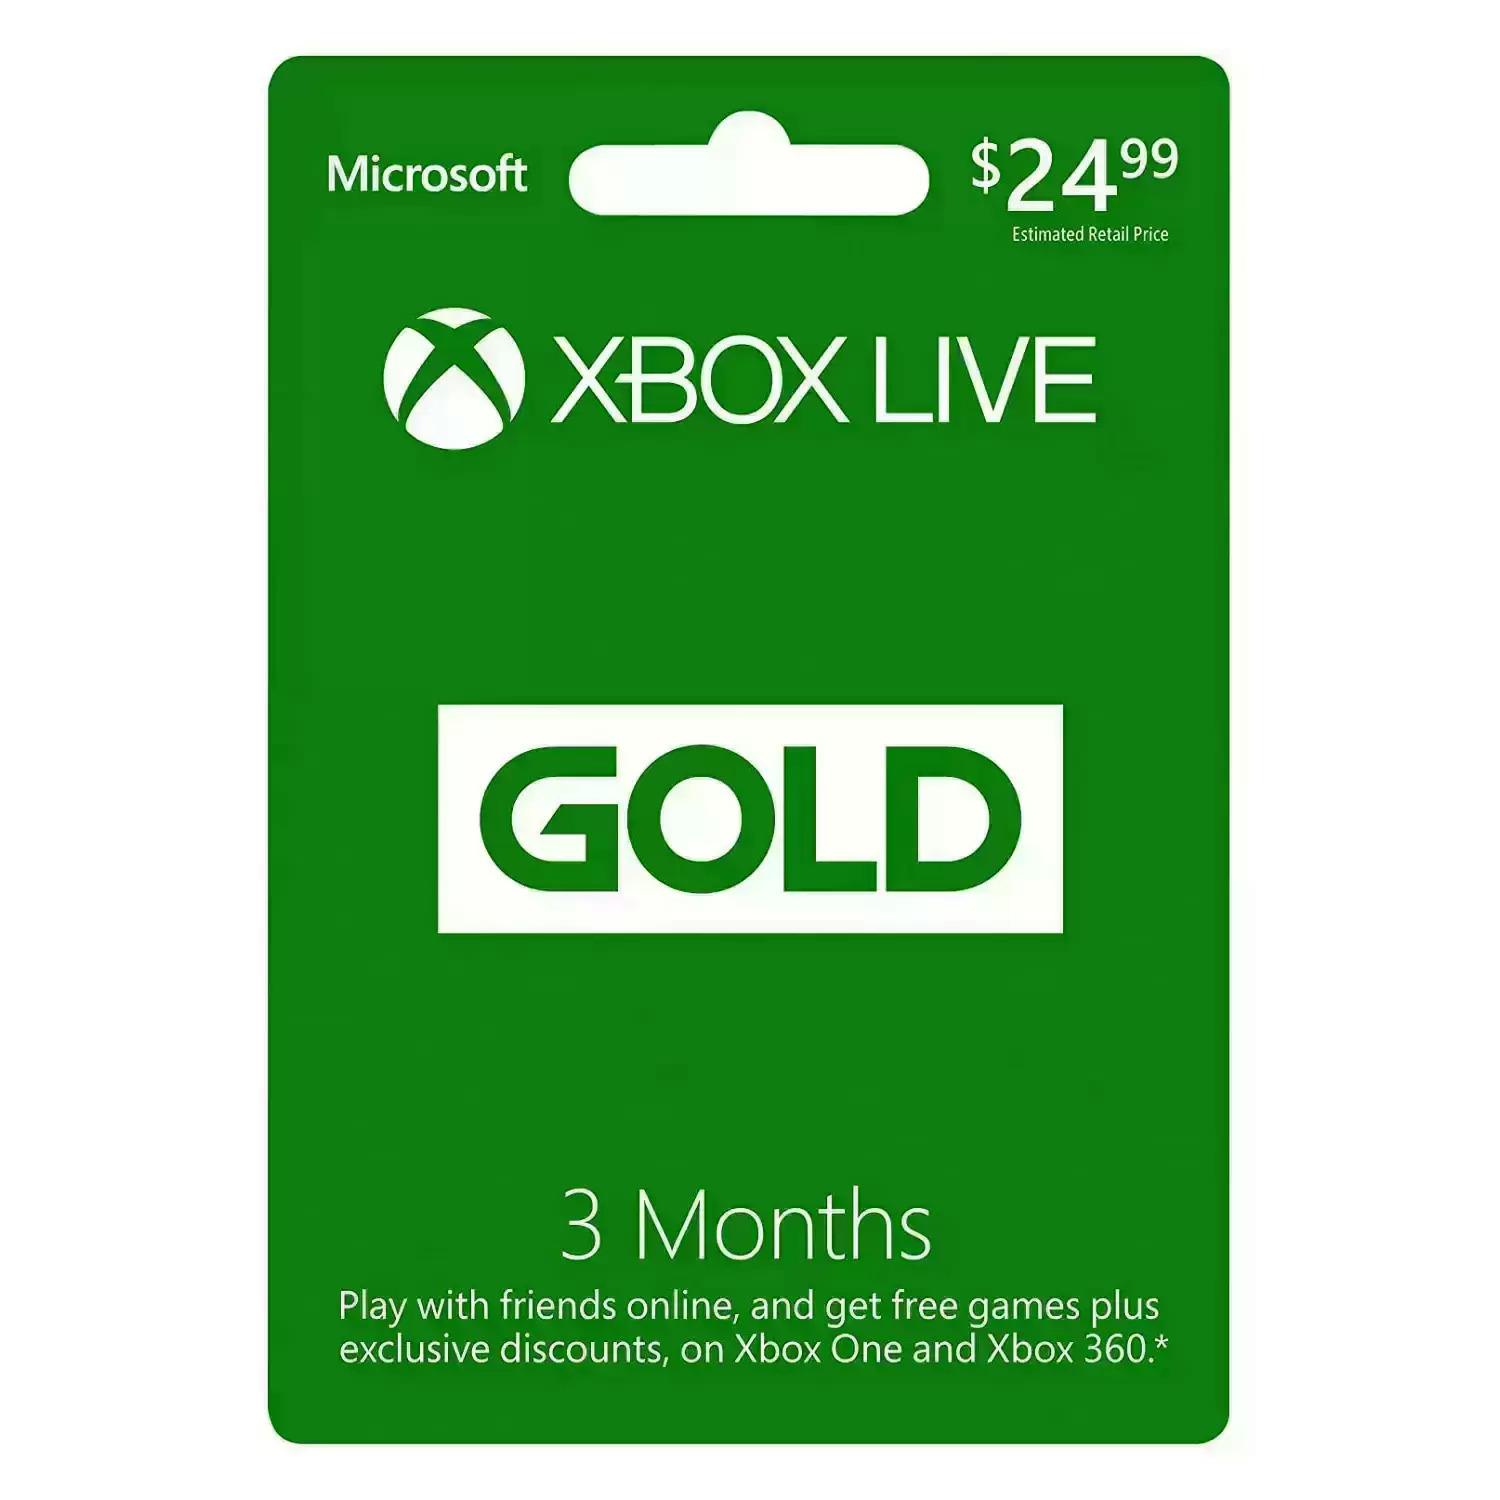 Xbox Live Gold 3 Month Subscription for $7.69